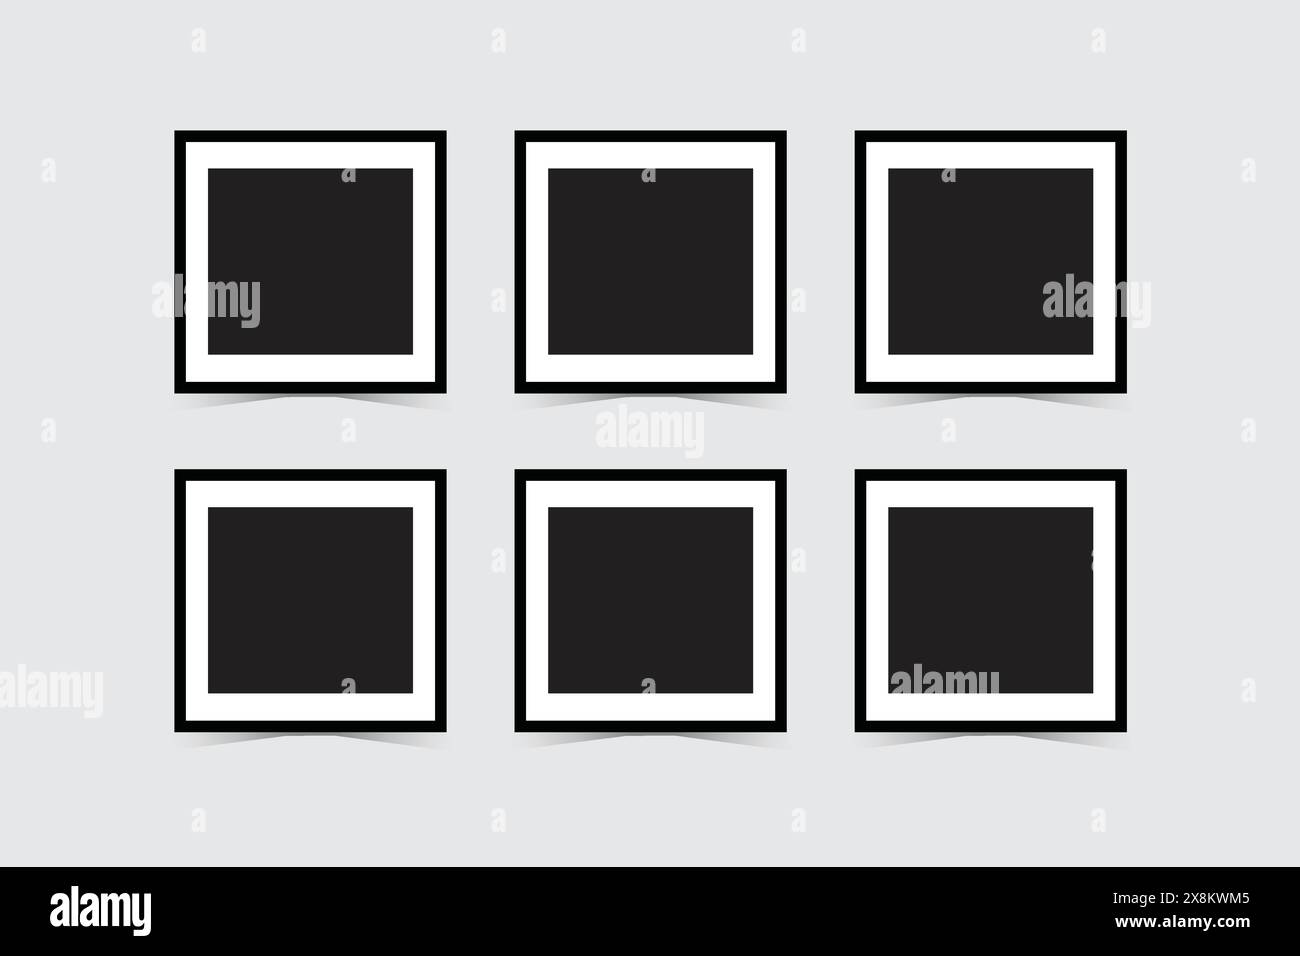 Templates photo collage image frames for photo or Picture Stock Vector